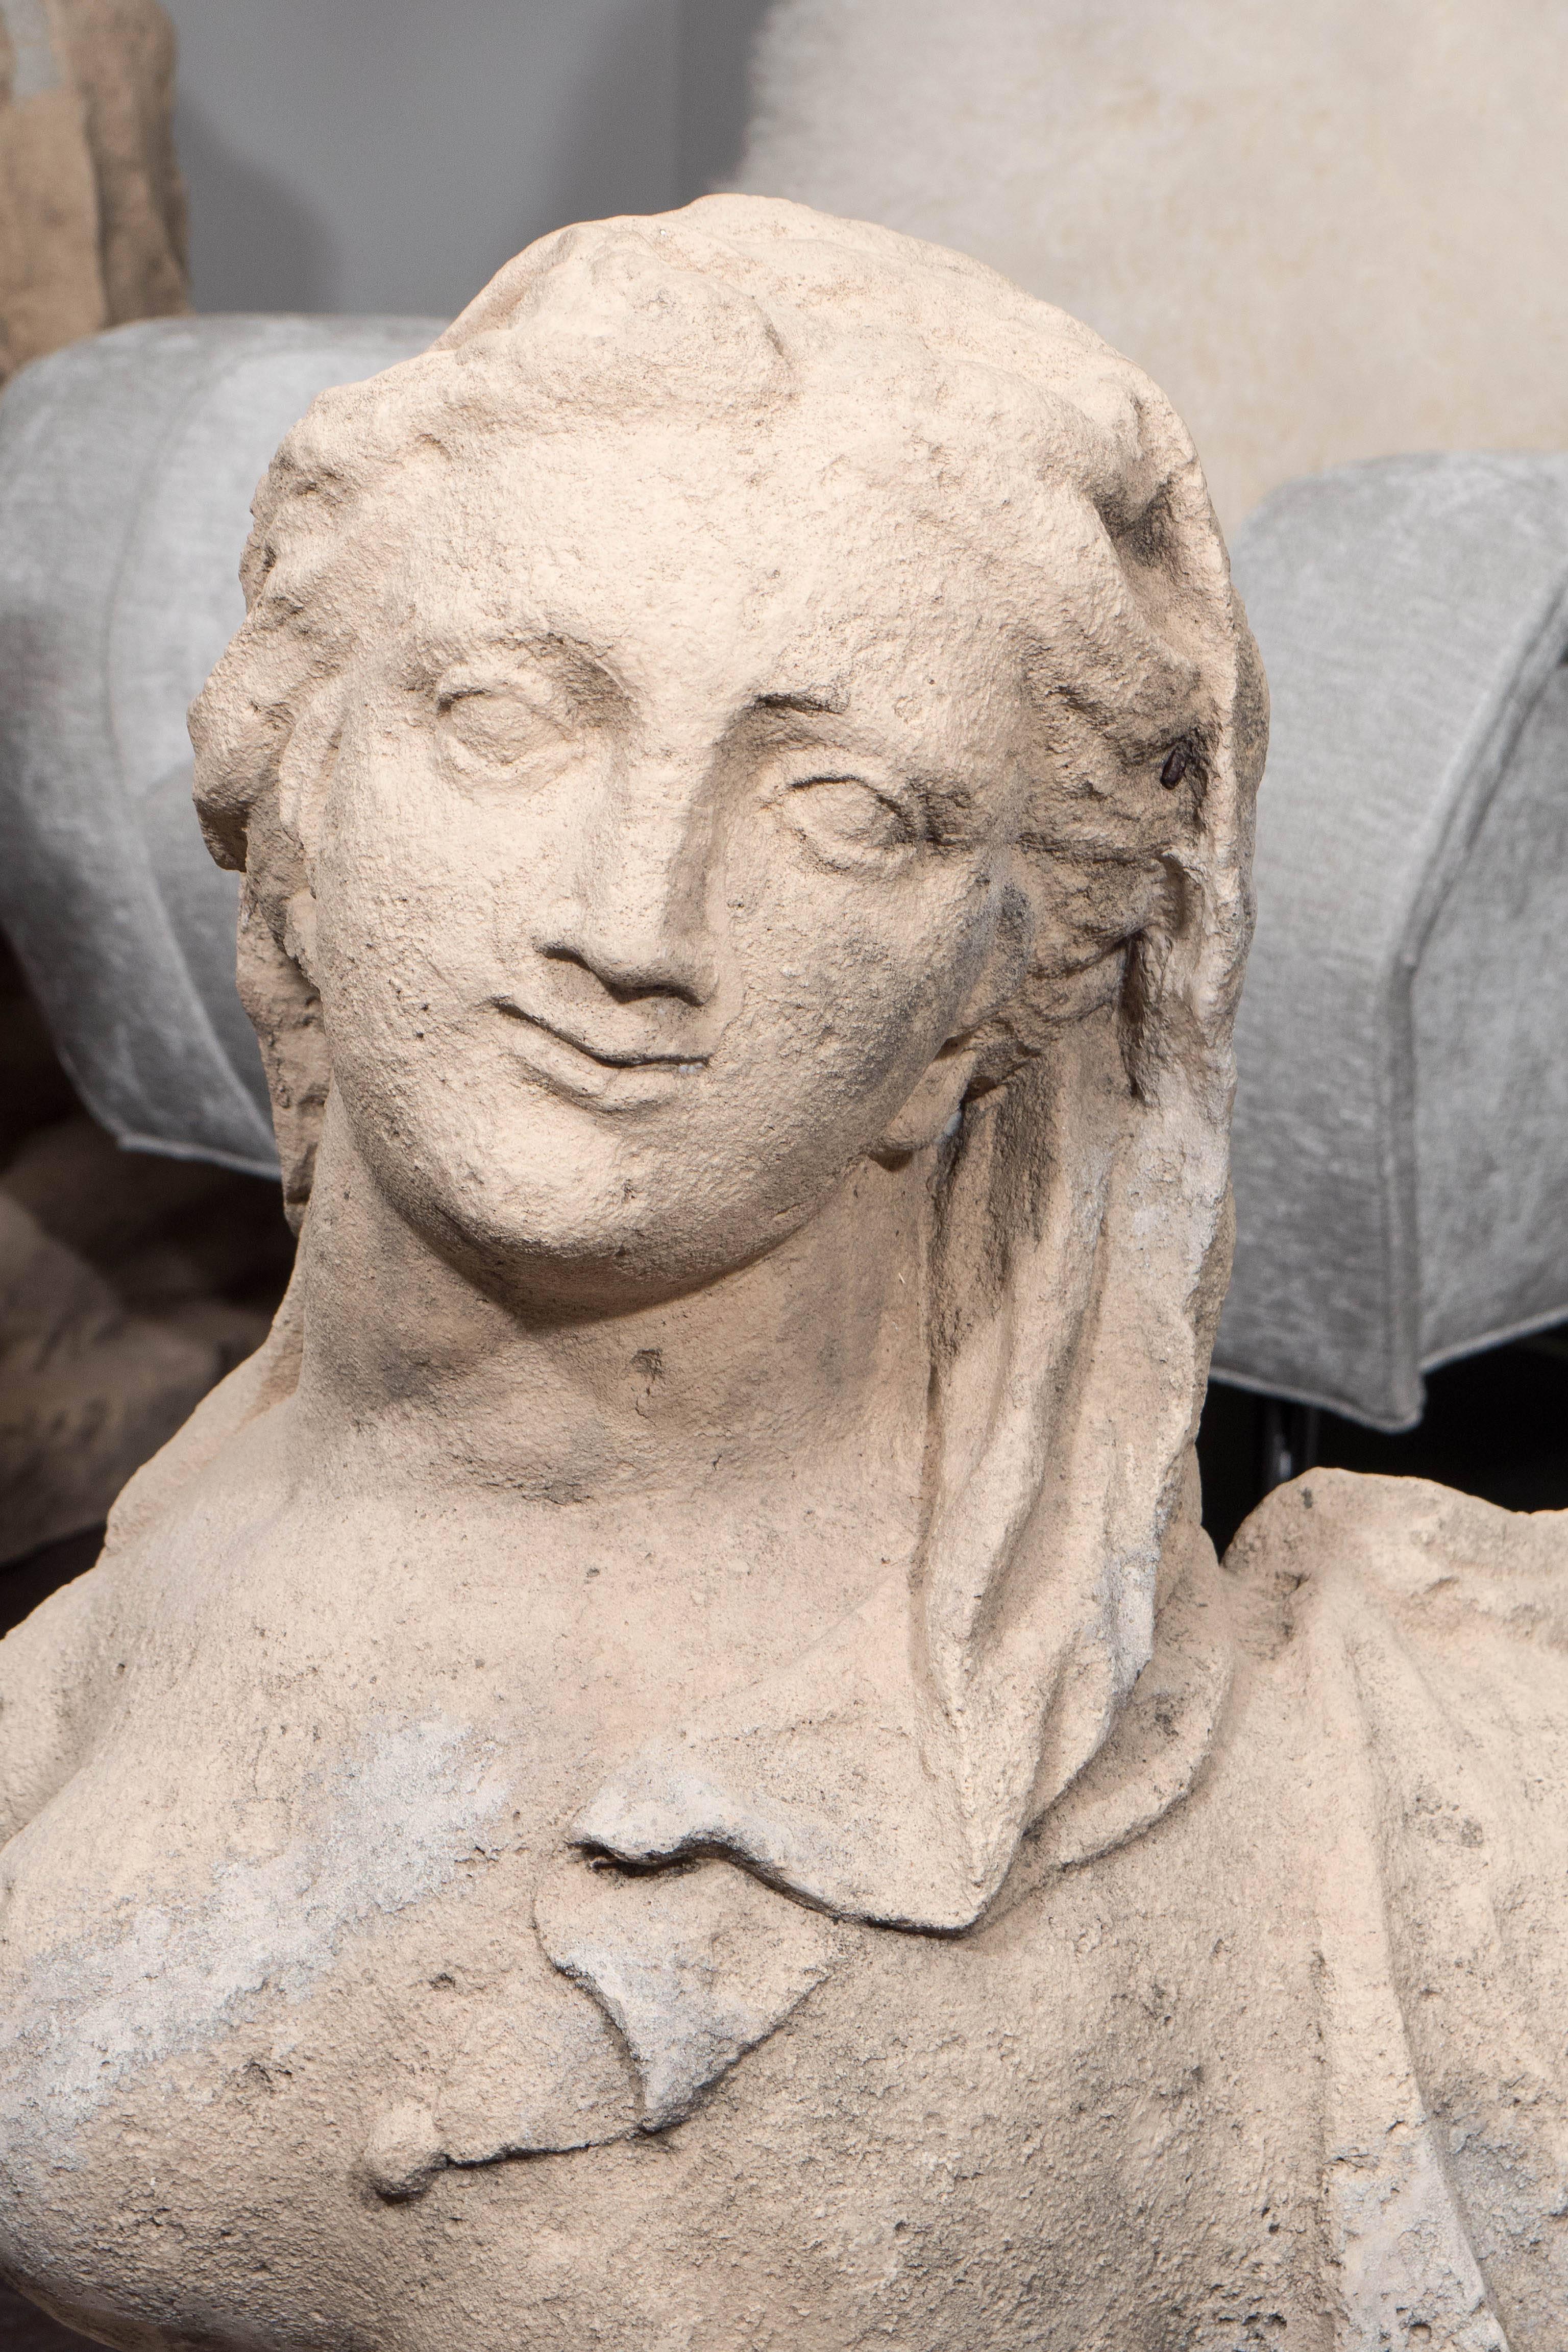 Pair of unusual stone Sphynx with the face of Marie Antoinette.